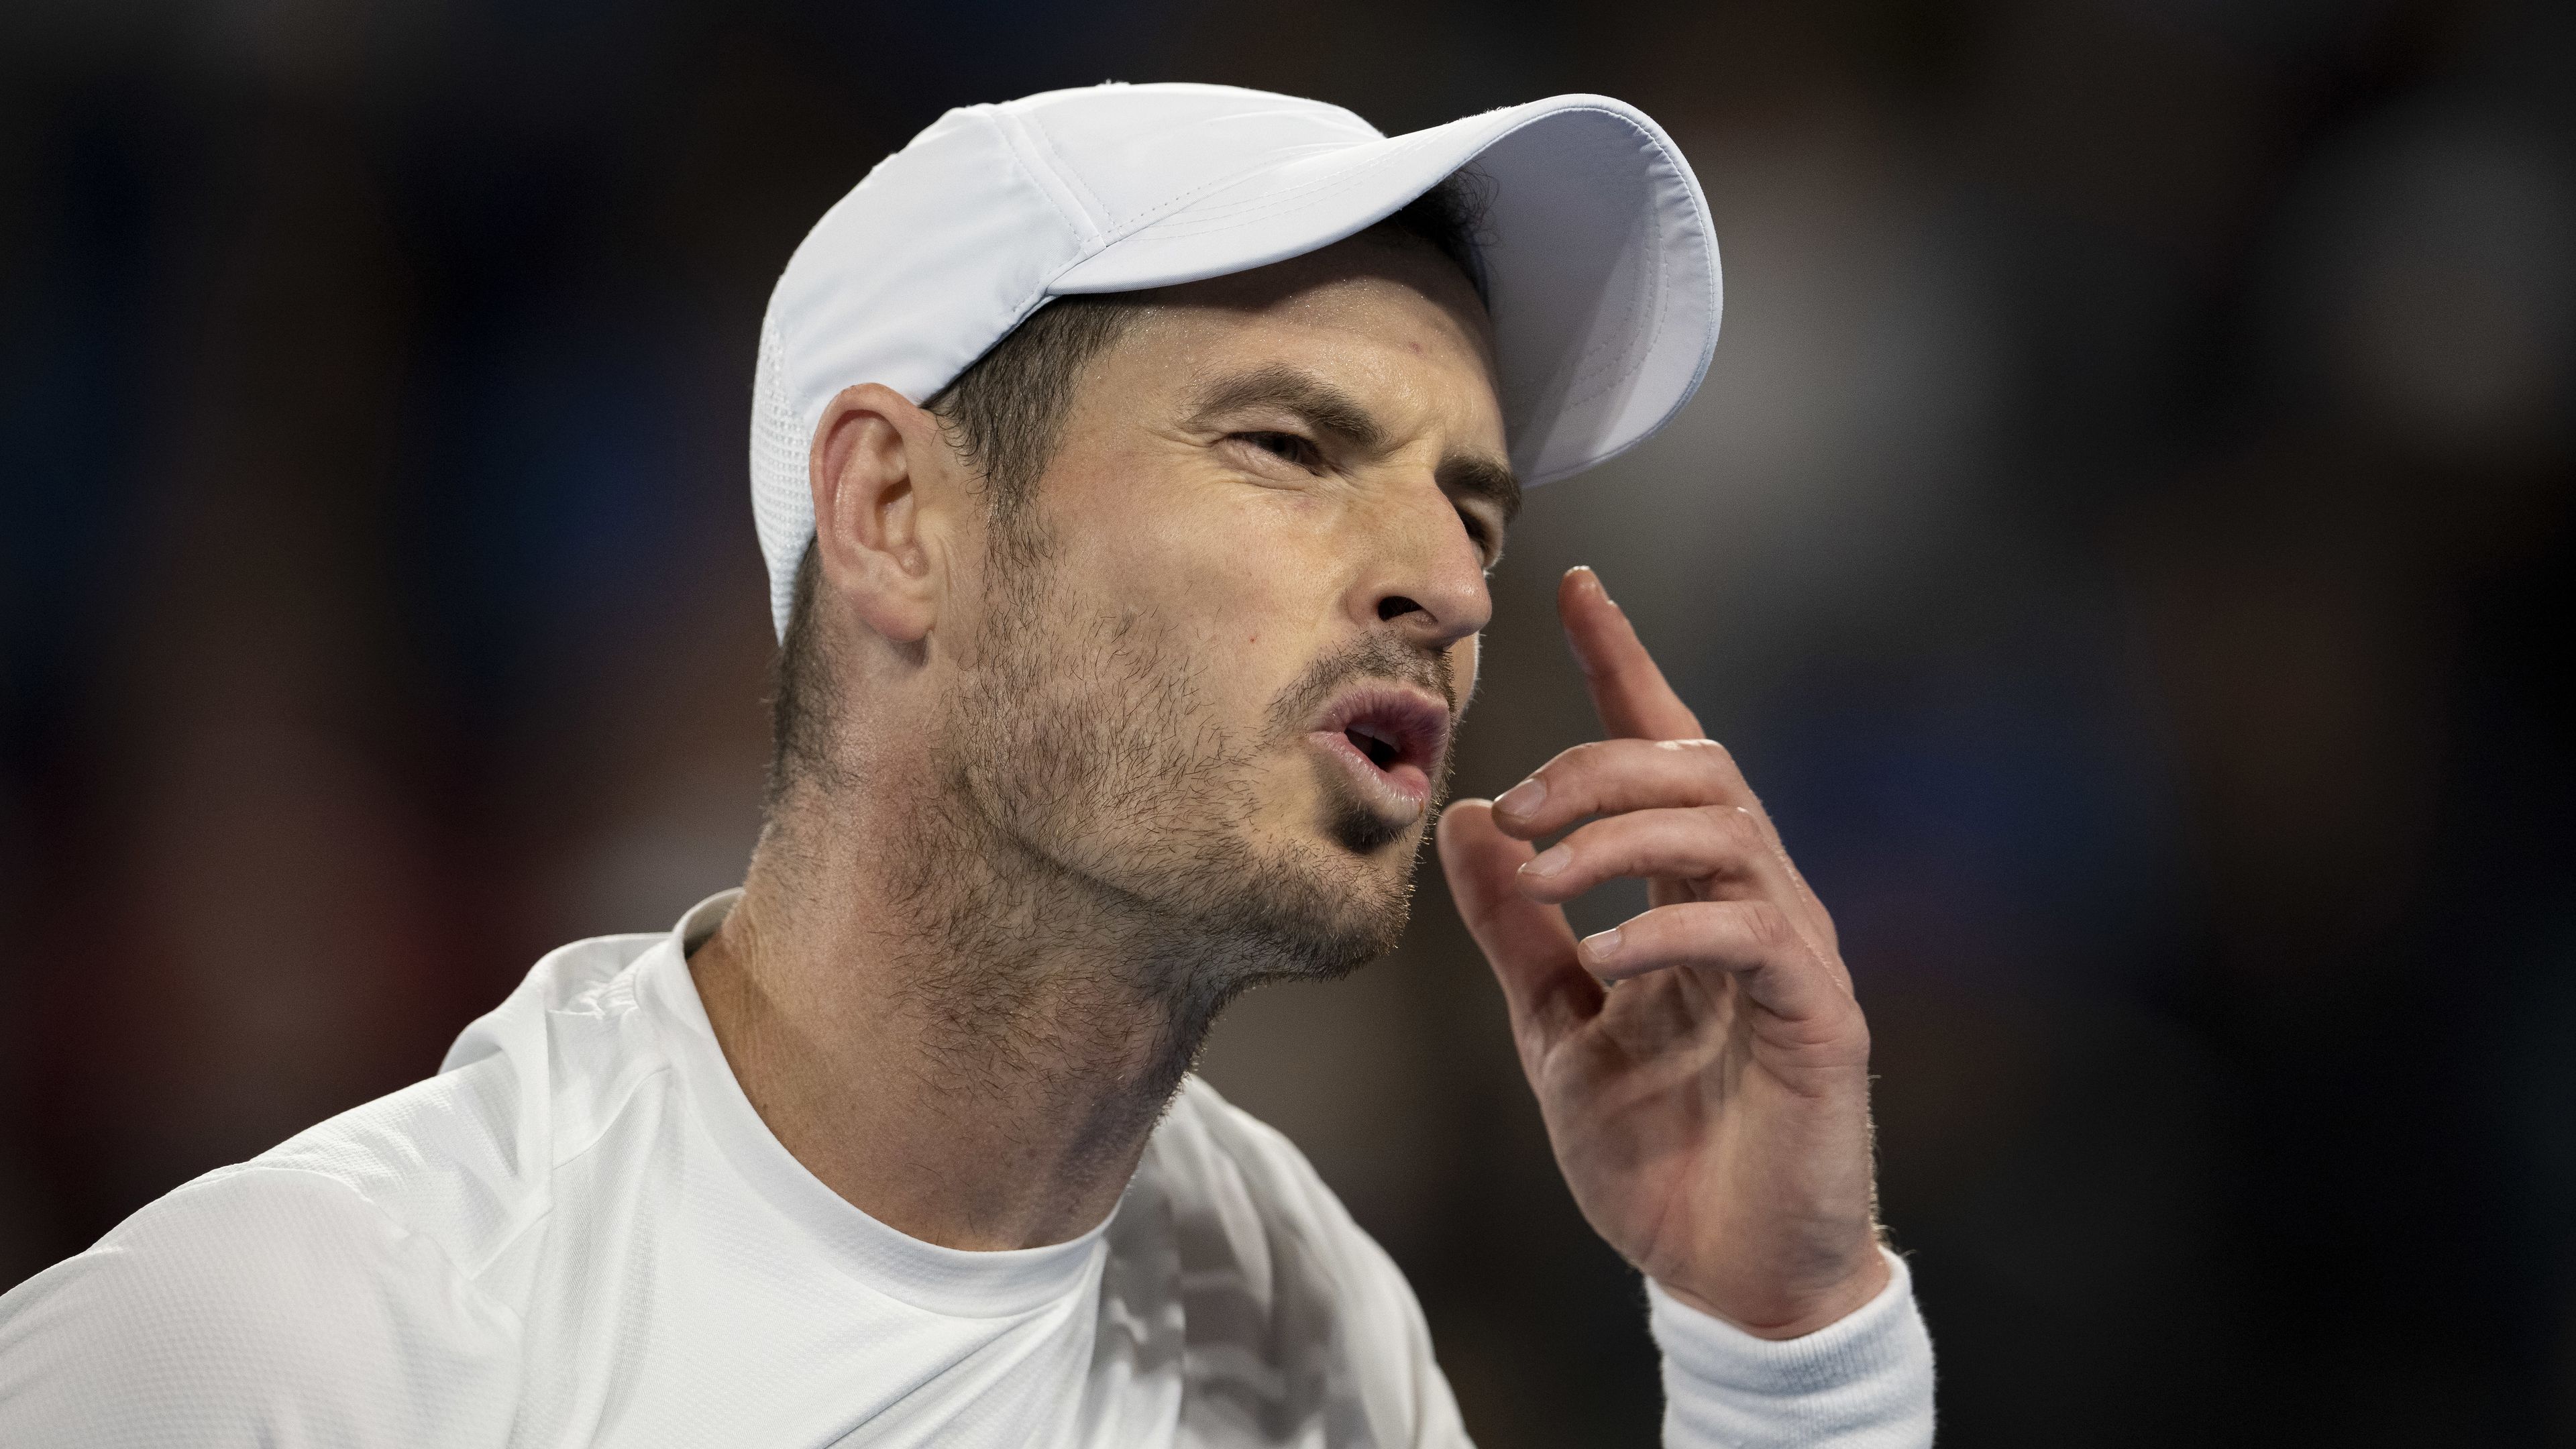 Andy Murray of Great Britain reacts in their round two singles match against Thanasi Kokkinakis of Australia during day four of the 2023 Australian Open at Melbourne Park on January 19, 2023 in Melbourne, Australia. (Photo by Will Murray/Getty Images)